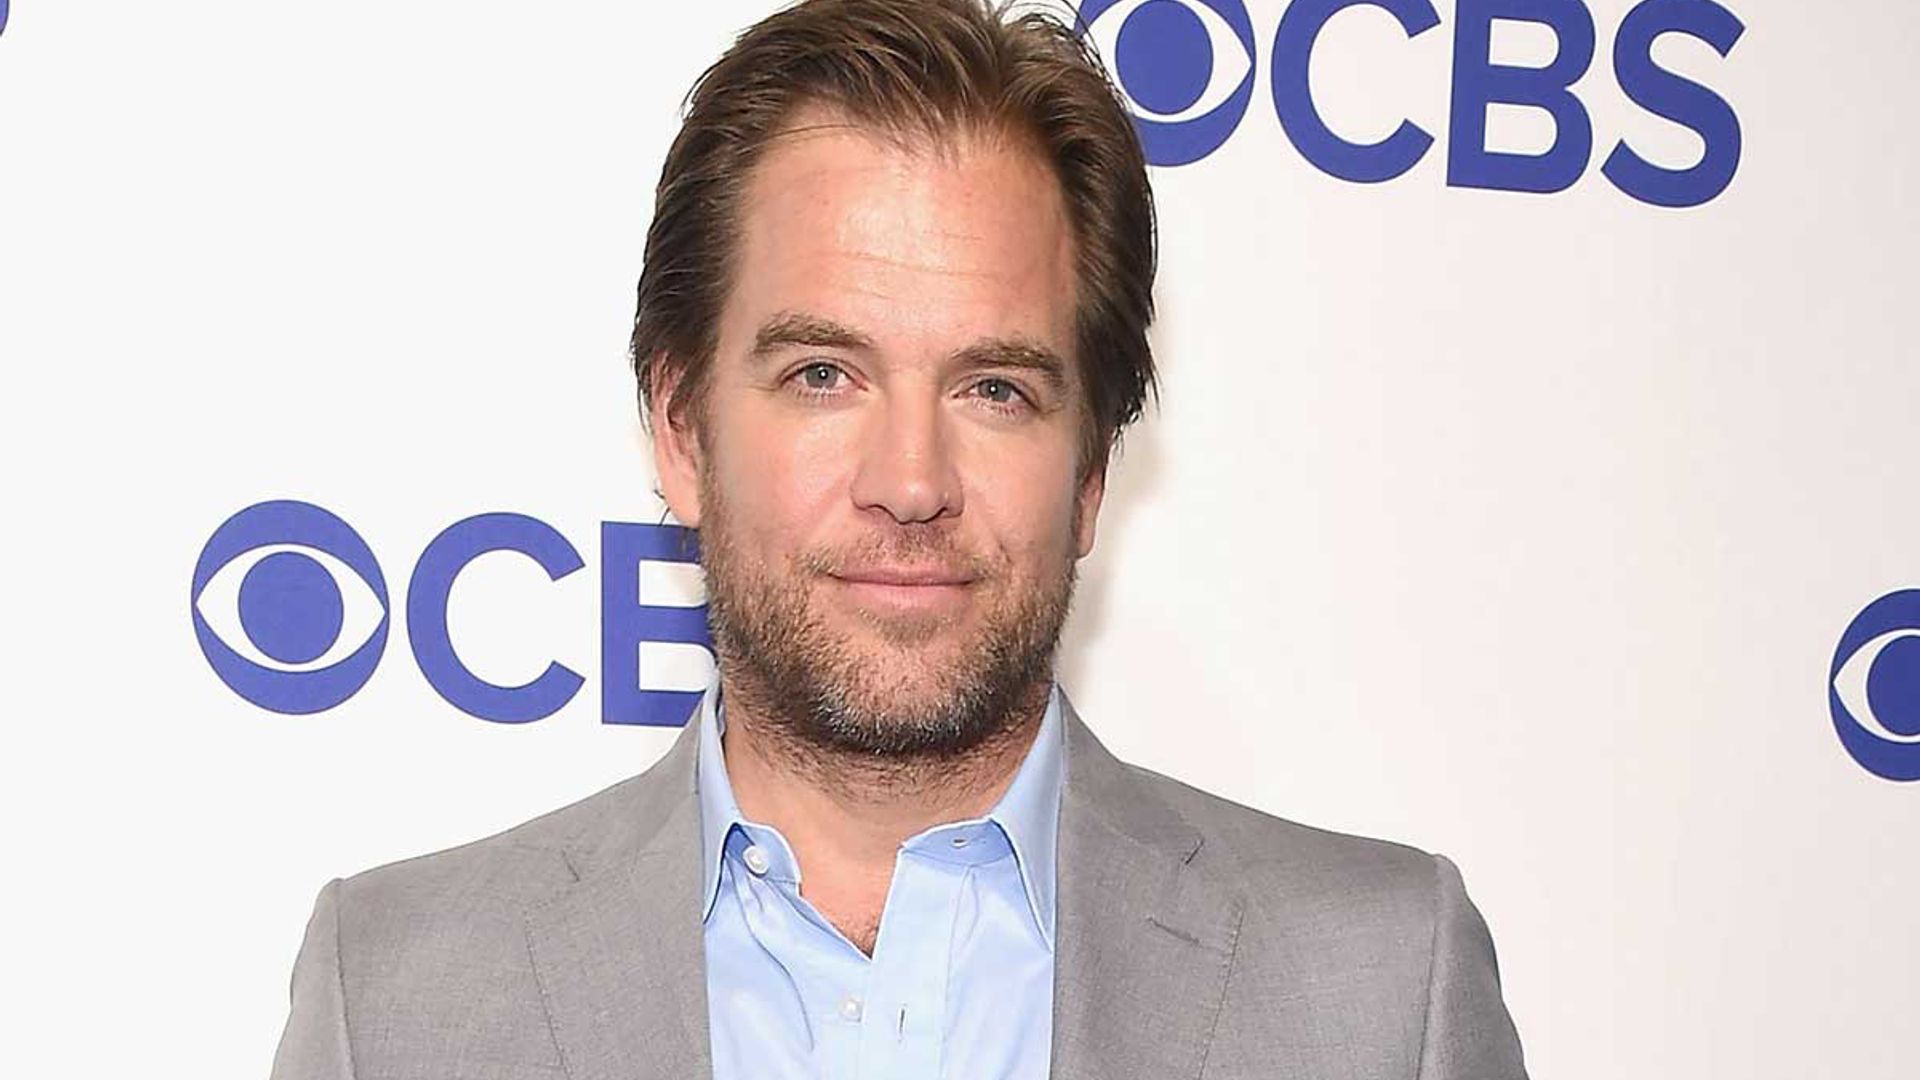 Ncis Fans In Disbelief As Michael Weatherly Shares Rare Photo Of Son